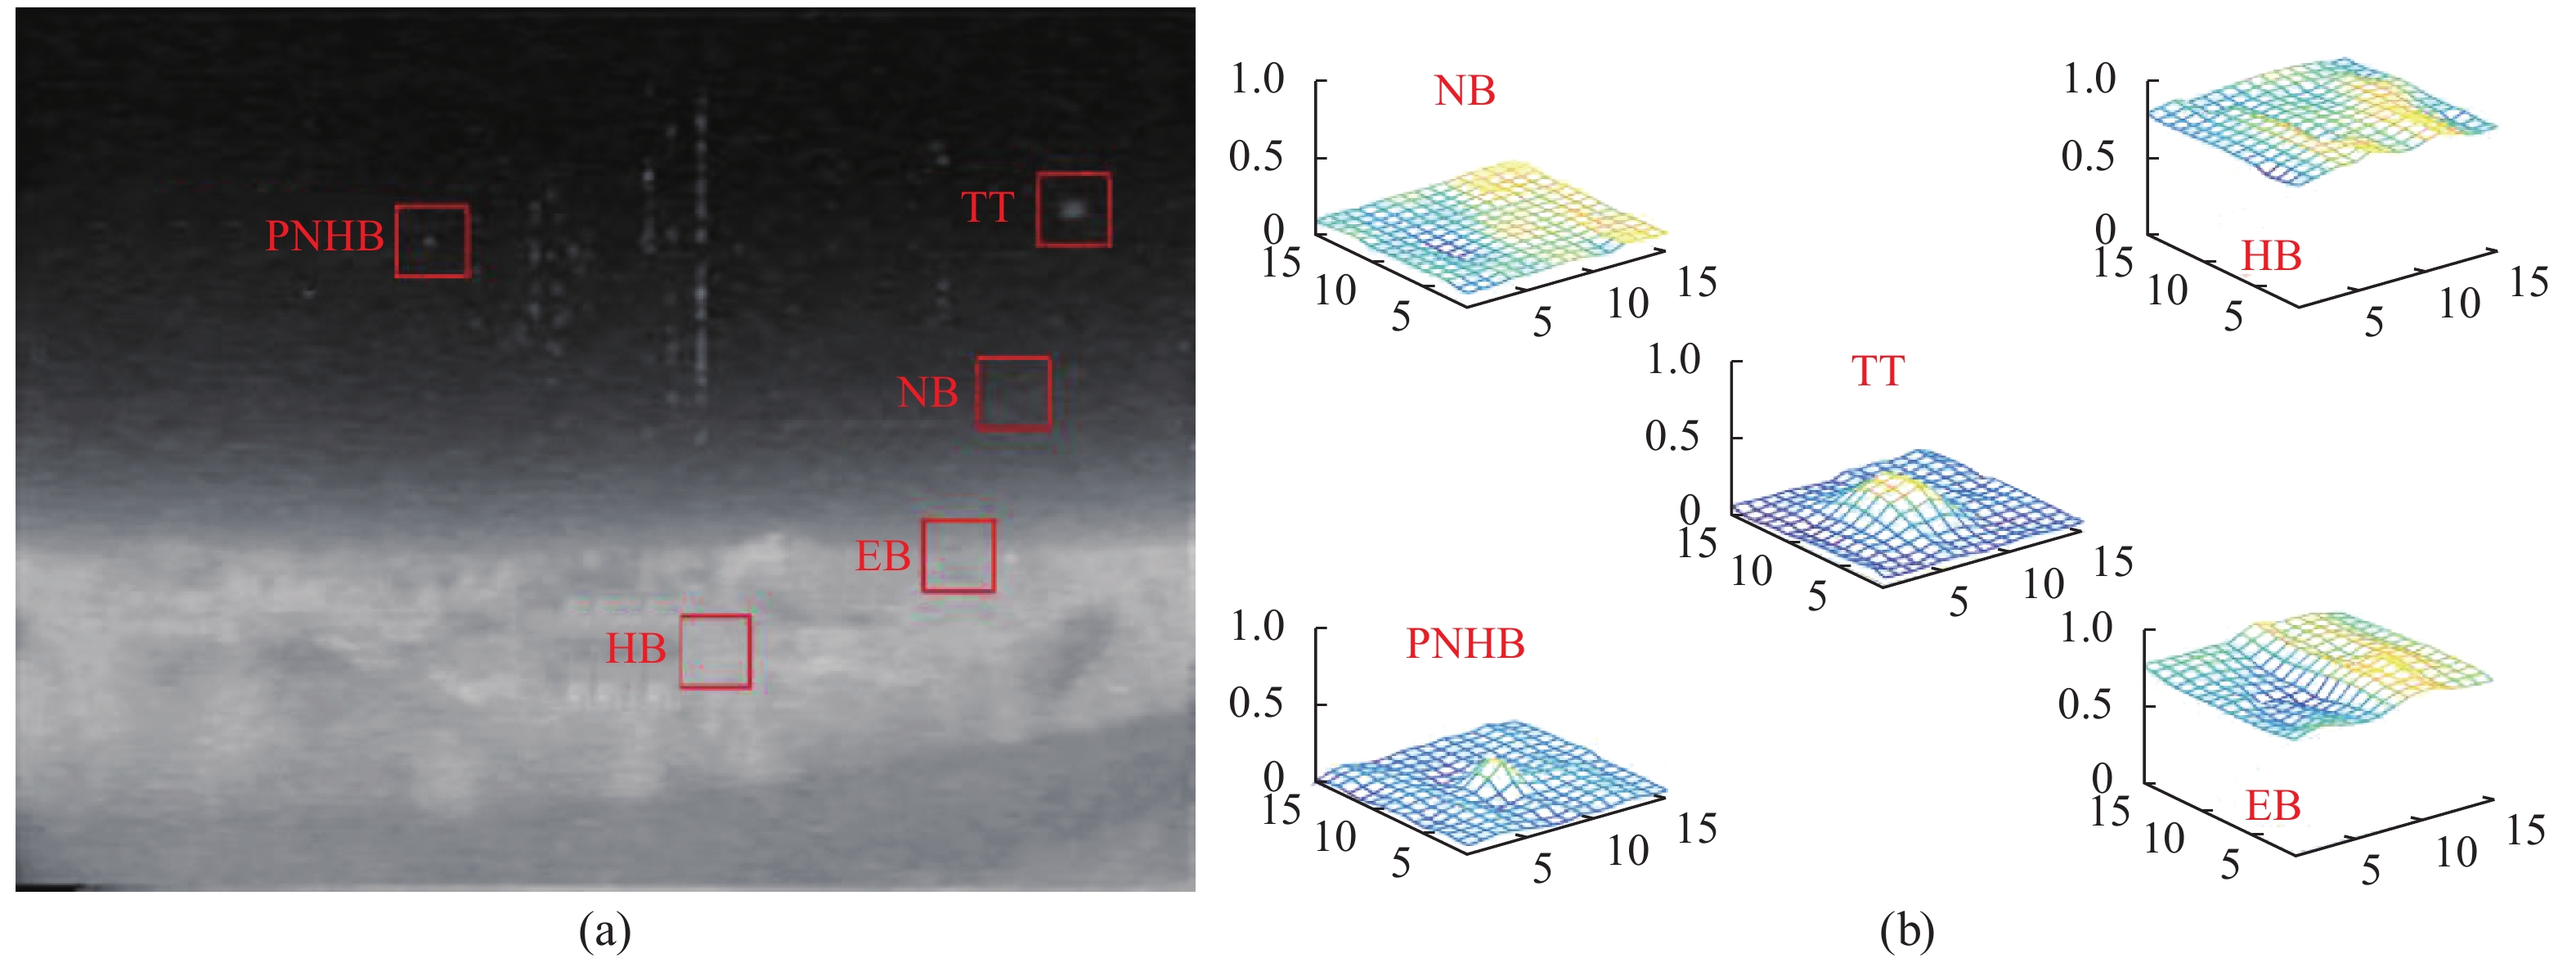 (a) A sample of real IR image; (b) 3D distributions of different types of components. Here, TT represents true small target, NB represents normal background, HB represents high brightness background, EB represents complex background edge, and PNHB represents Pixel-sized Noises with High Brightness